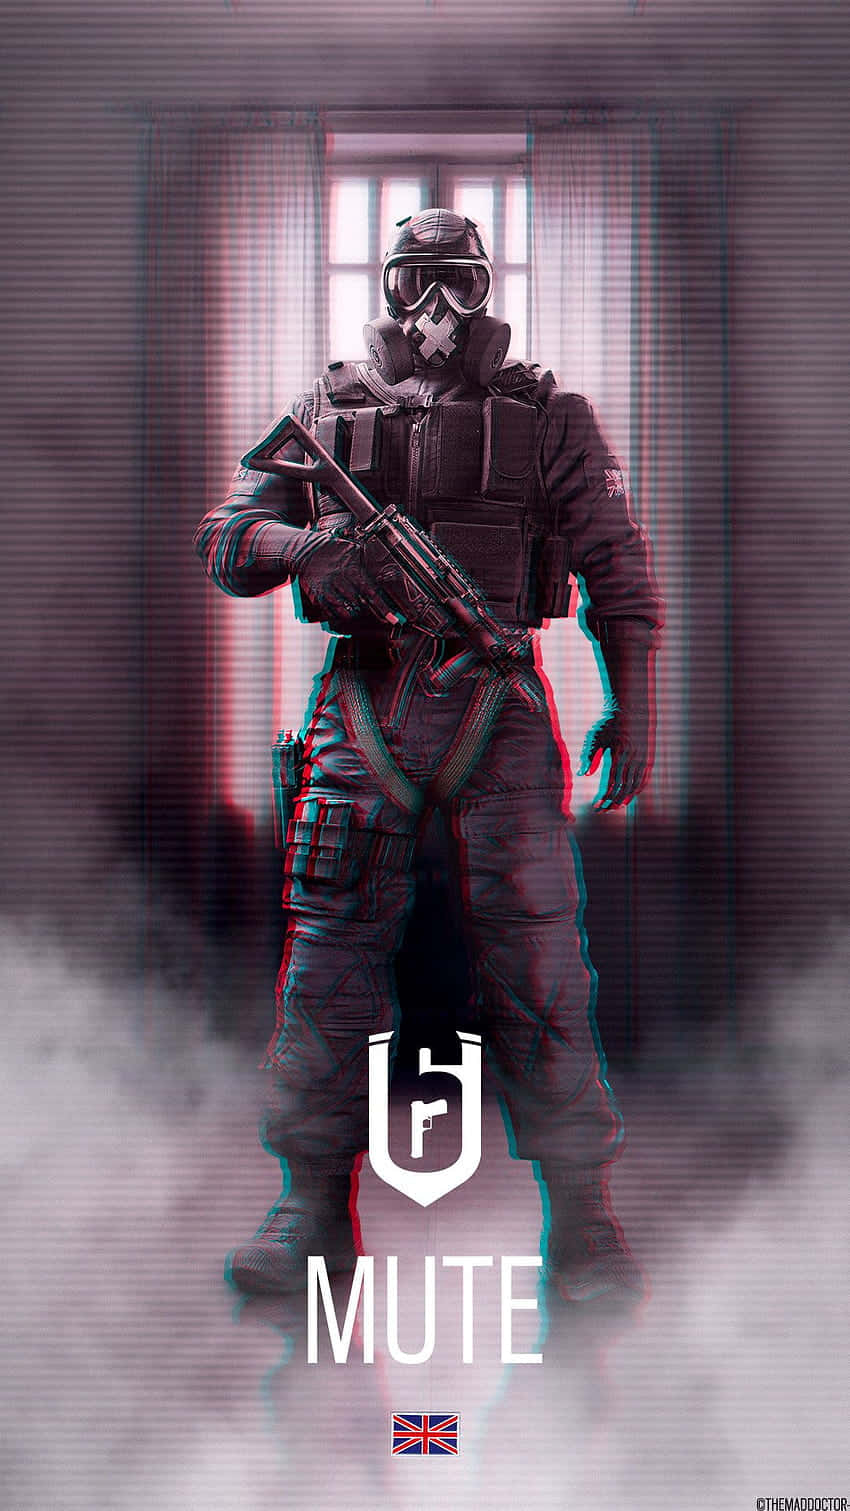 Mute Surrounded By Smoke [wallpaper] Wallpaper